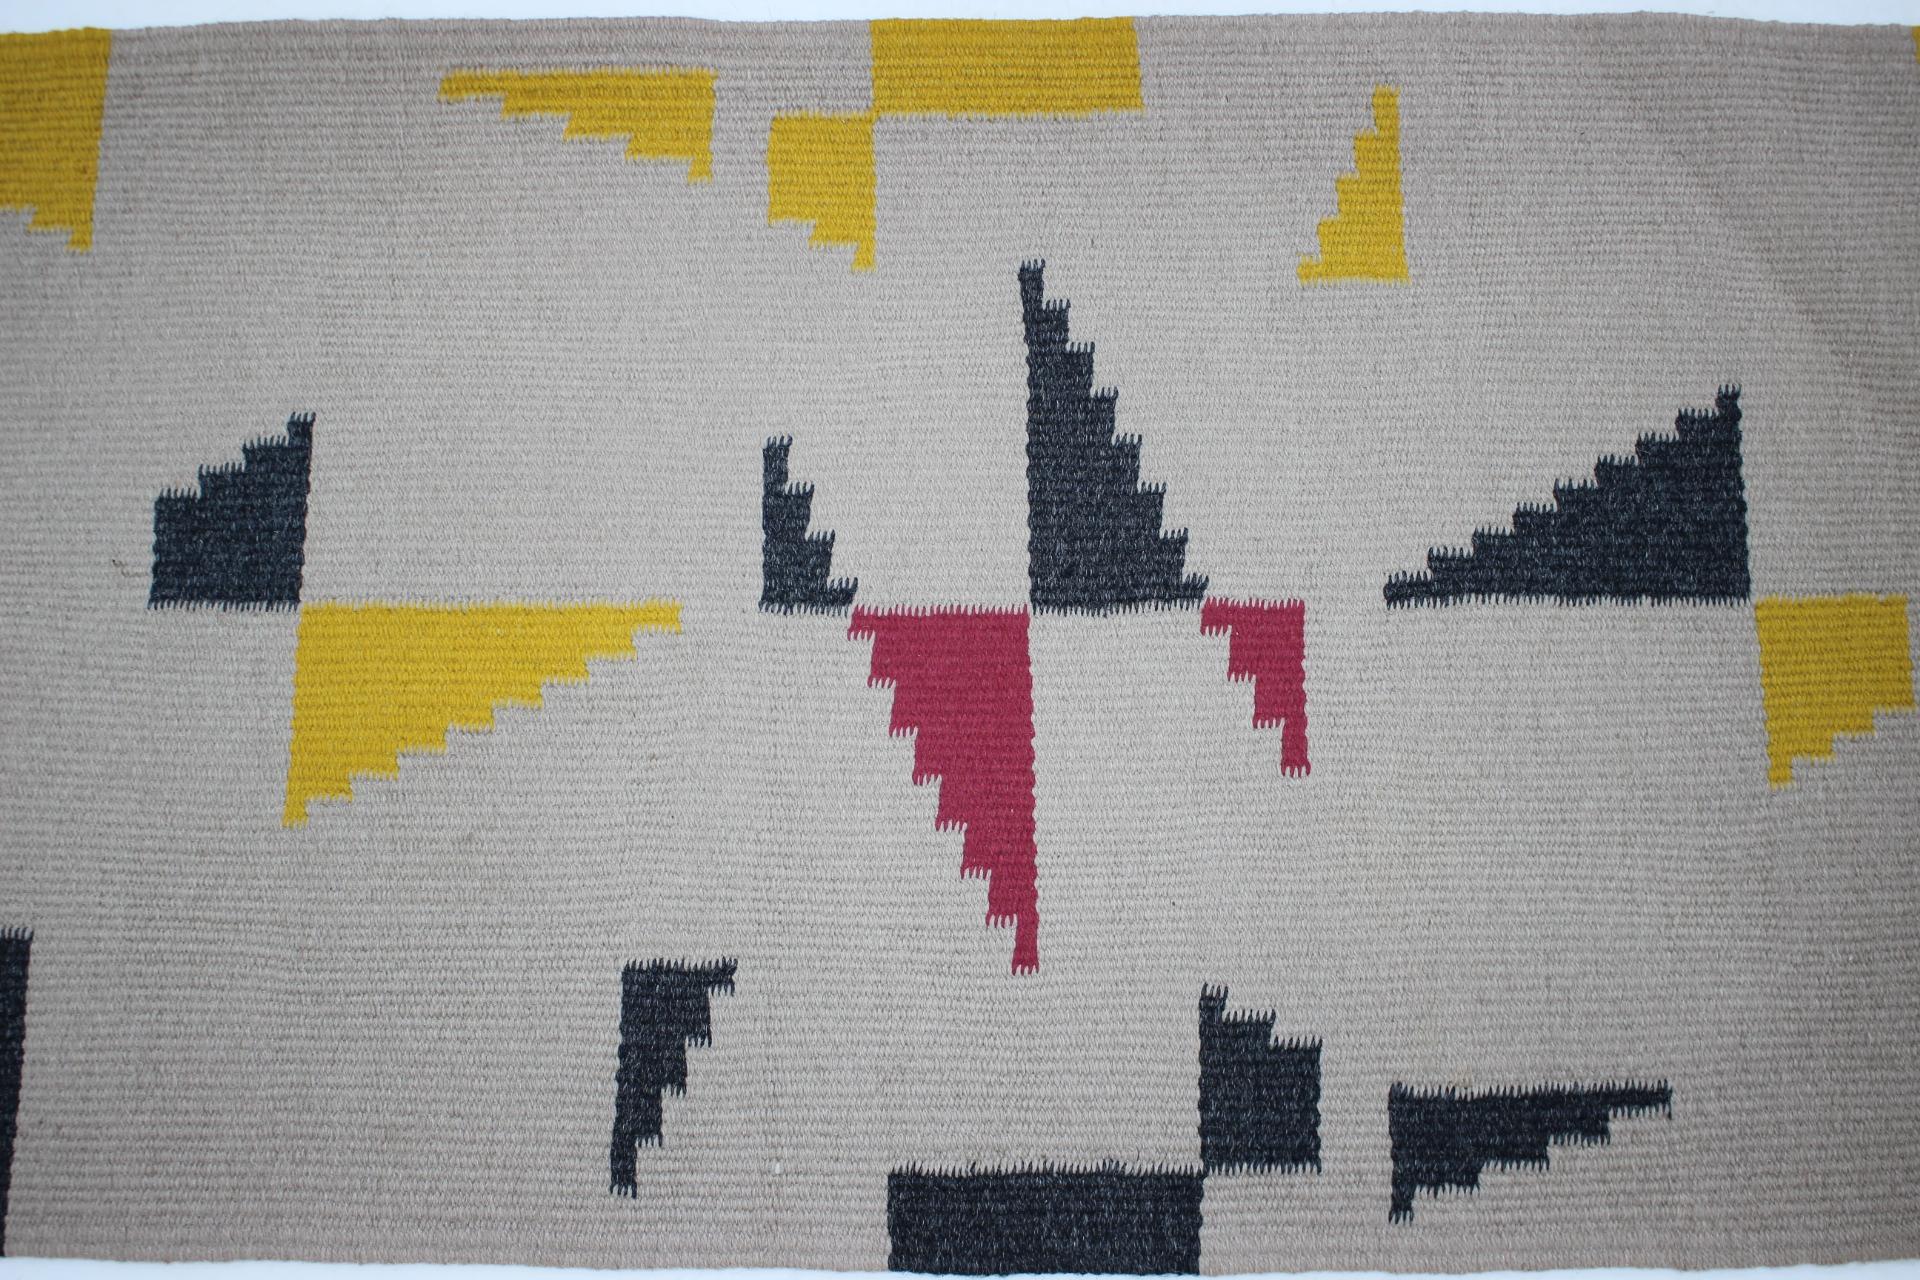 Woven Small Geometric Wool Kilim Carpet/Rug in Style of Antonin Kybal, 1950s For Sale